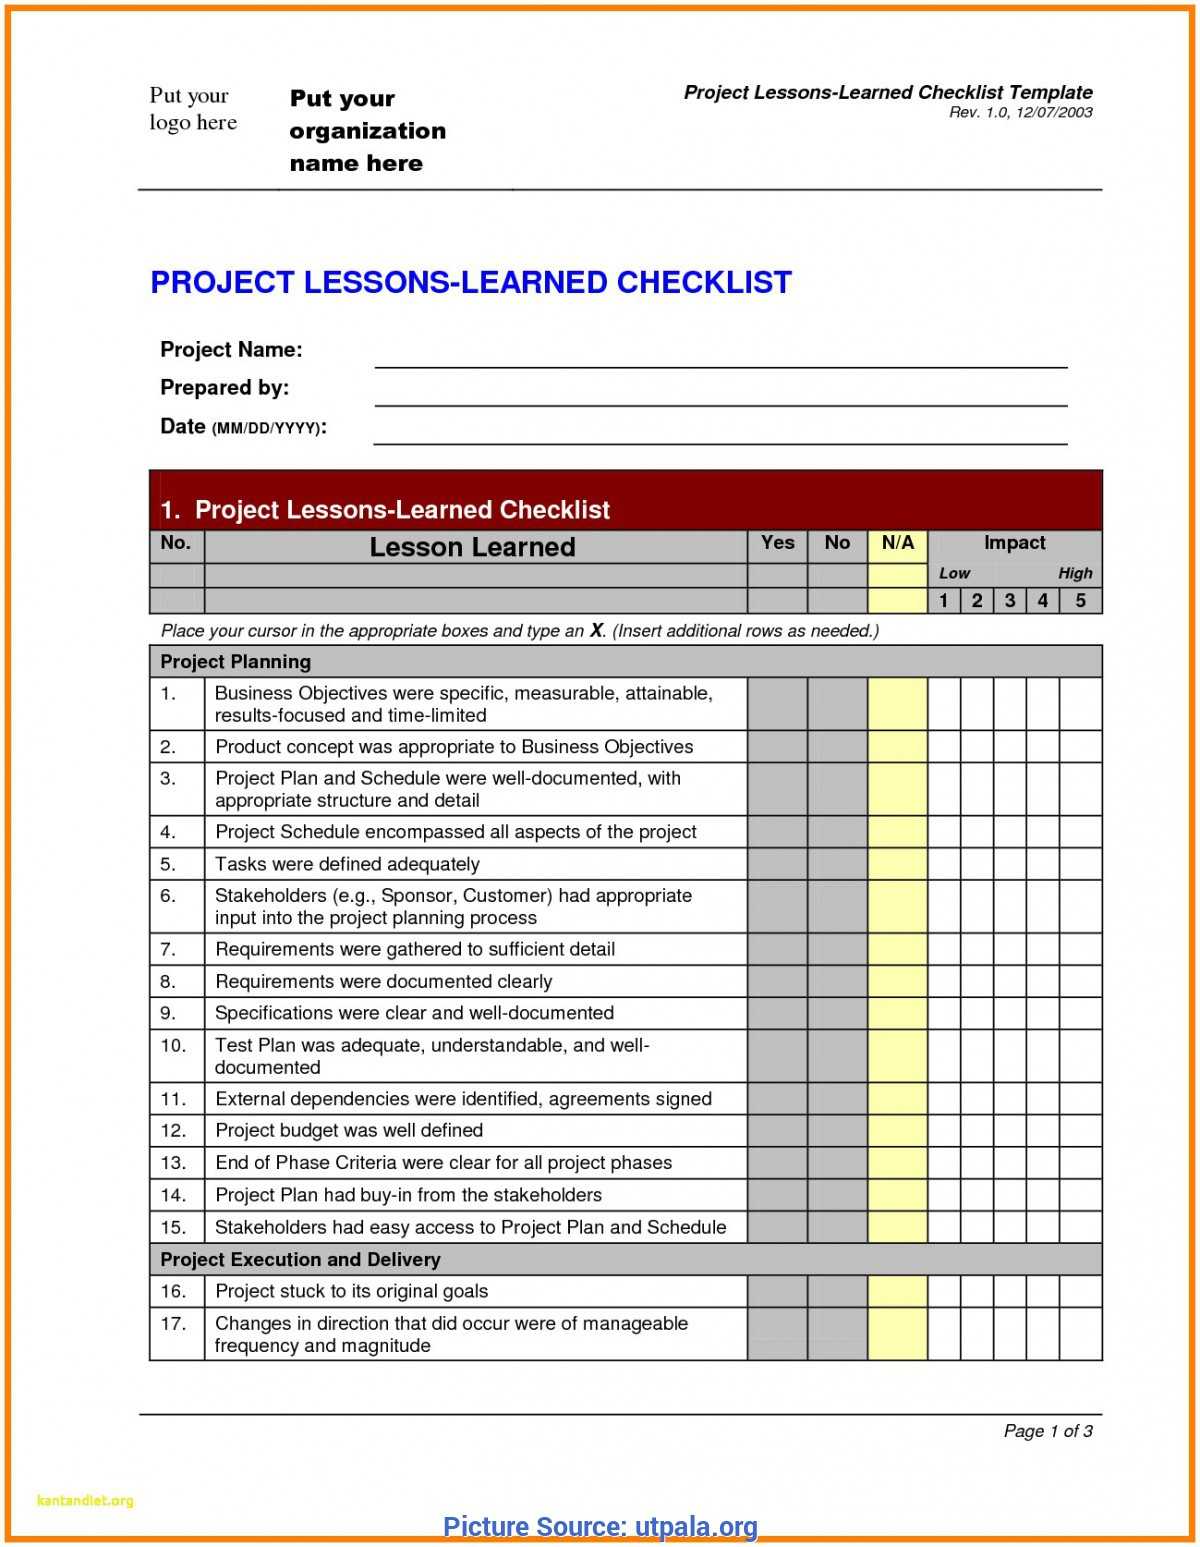 Fresh Lessons Learned Report Template Prince2 Prince2 With Prince2 Lessons Learned Report Template